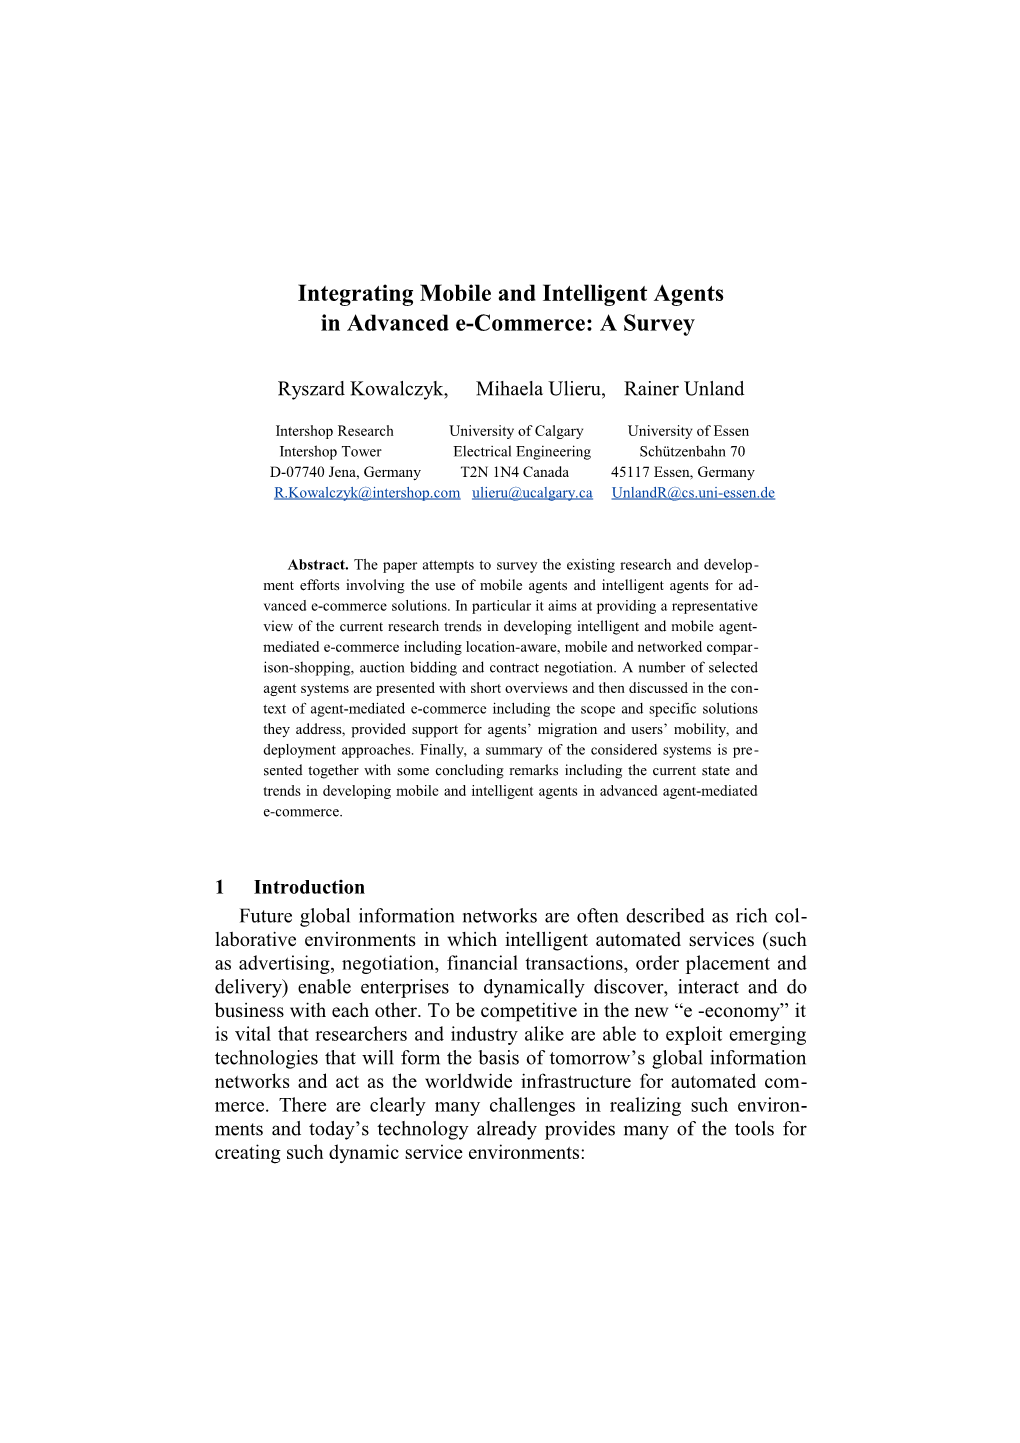 Integrating Mobile and Intelligent Agents in Advanced E-Commerce: a Survey